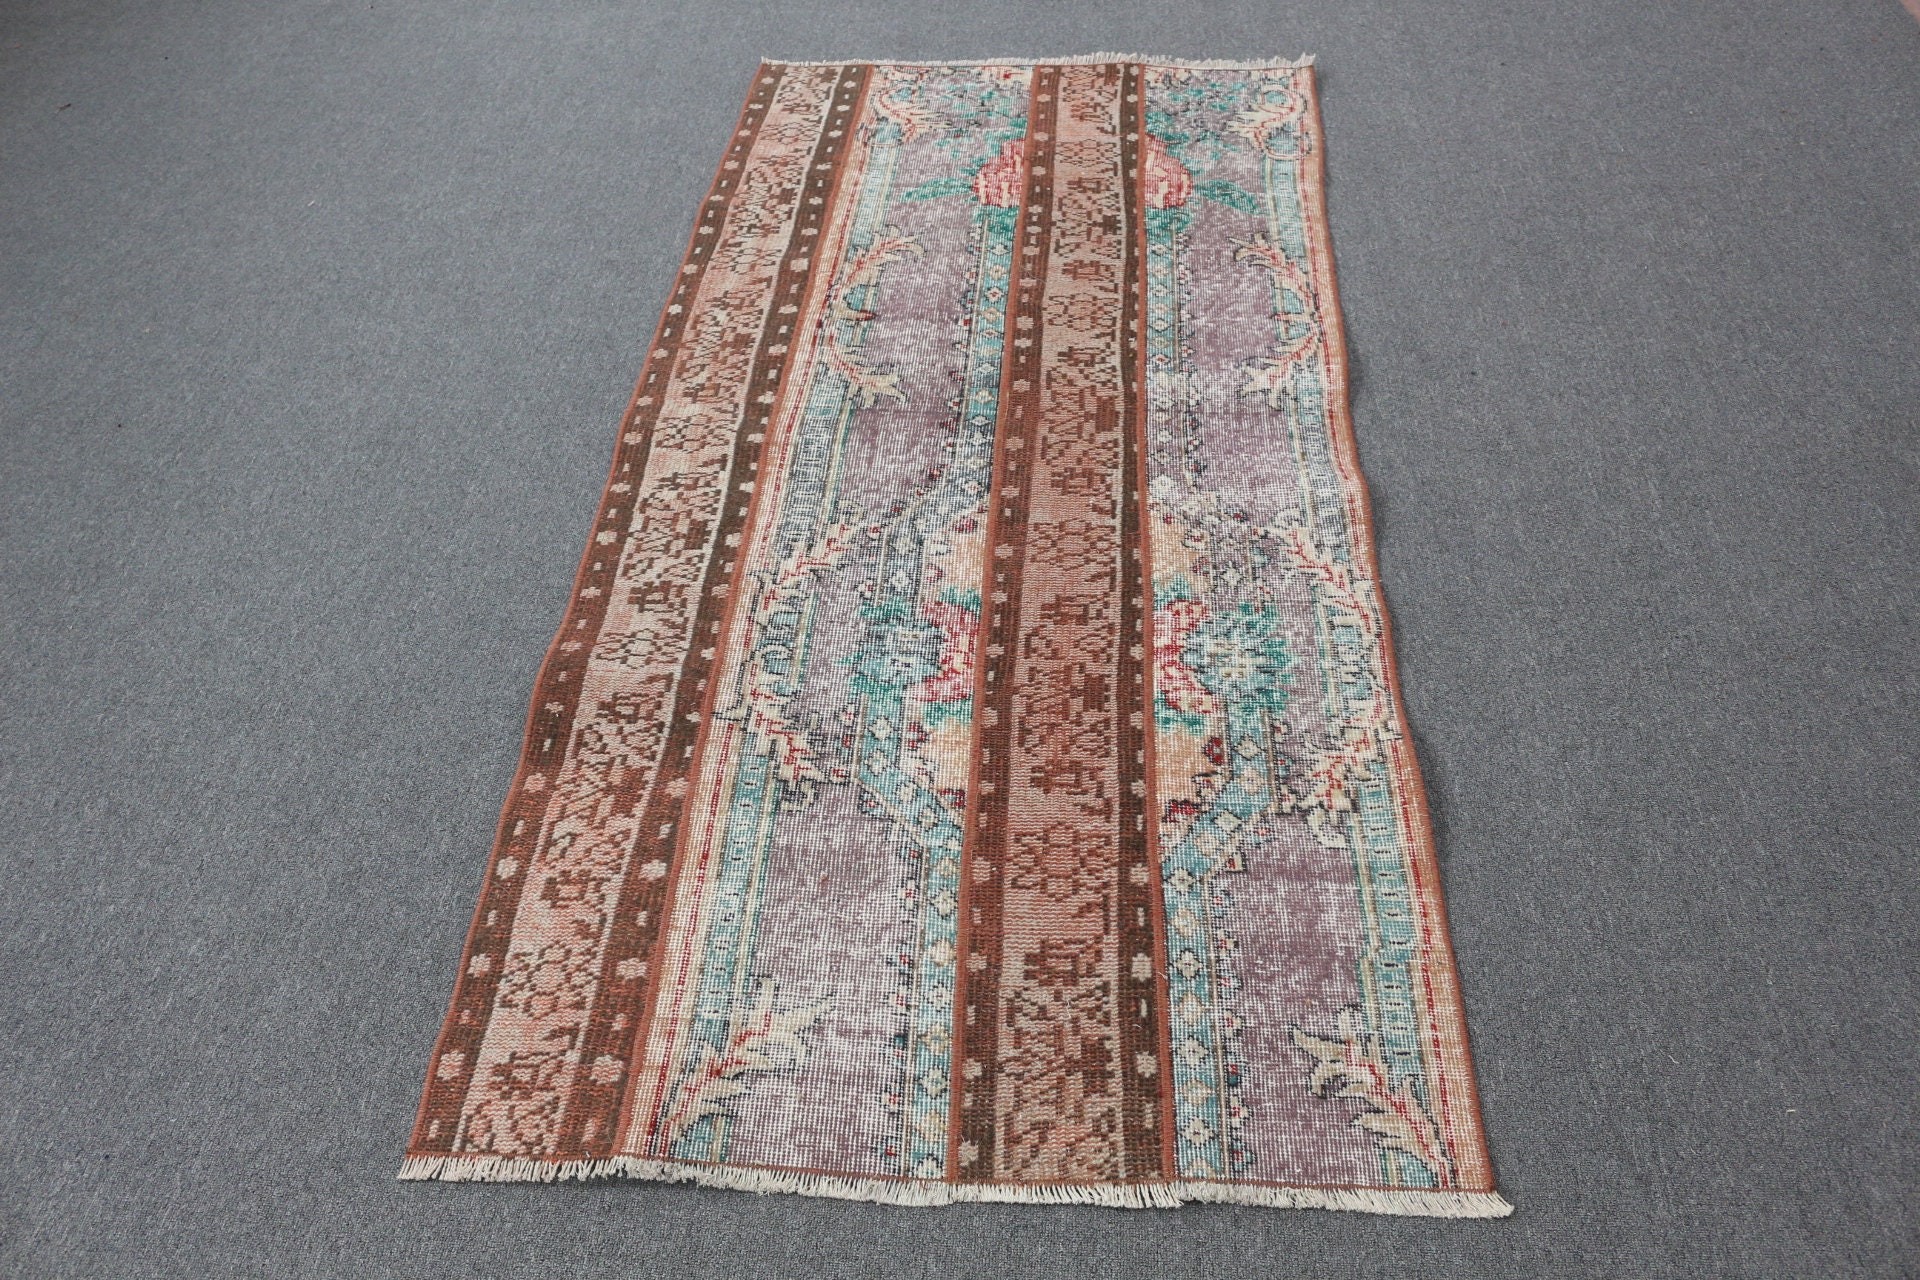 Bedroom Rugs, 3.1x6.7 ft Accent Rug, Brown Anatolian Rugs, Entry Rug, Turkish Rug, Oushak Rug, Moroccan Rug, Vintage Rug, Rugs for Kitchen